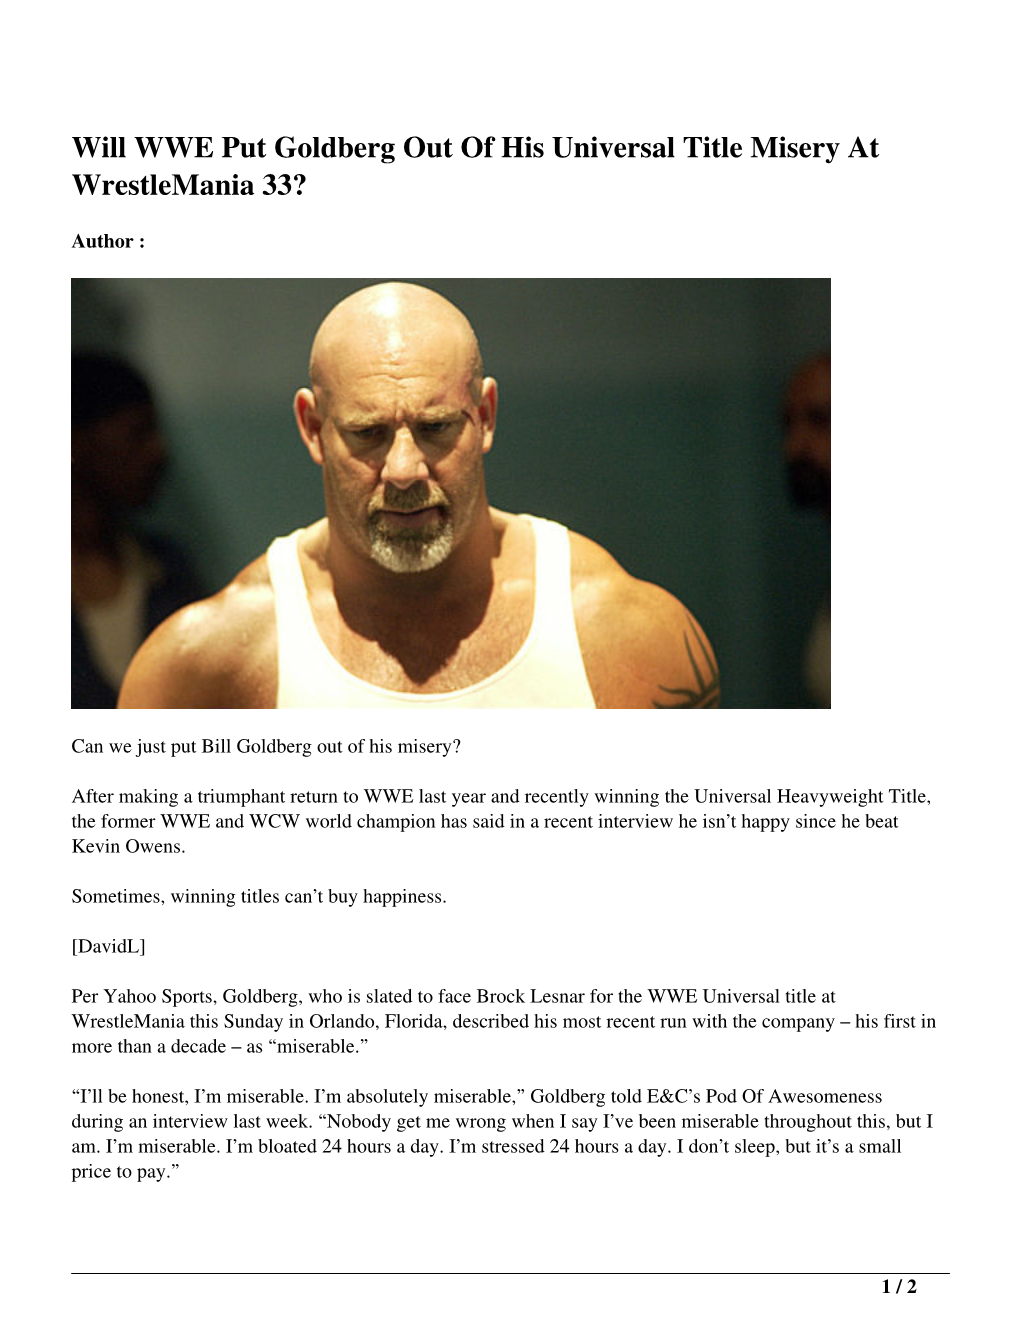 Will WWE Put Goldberg out of His Universal Title Misery at Wrestlemania 33?